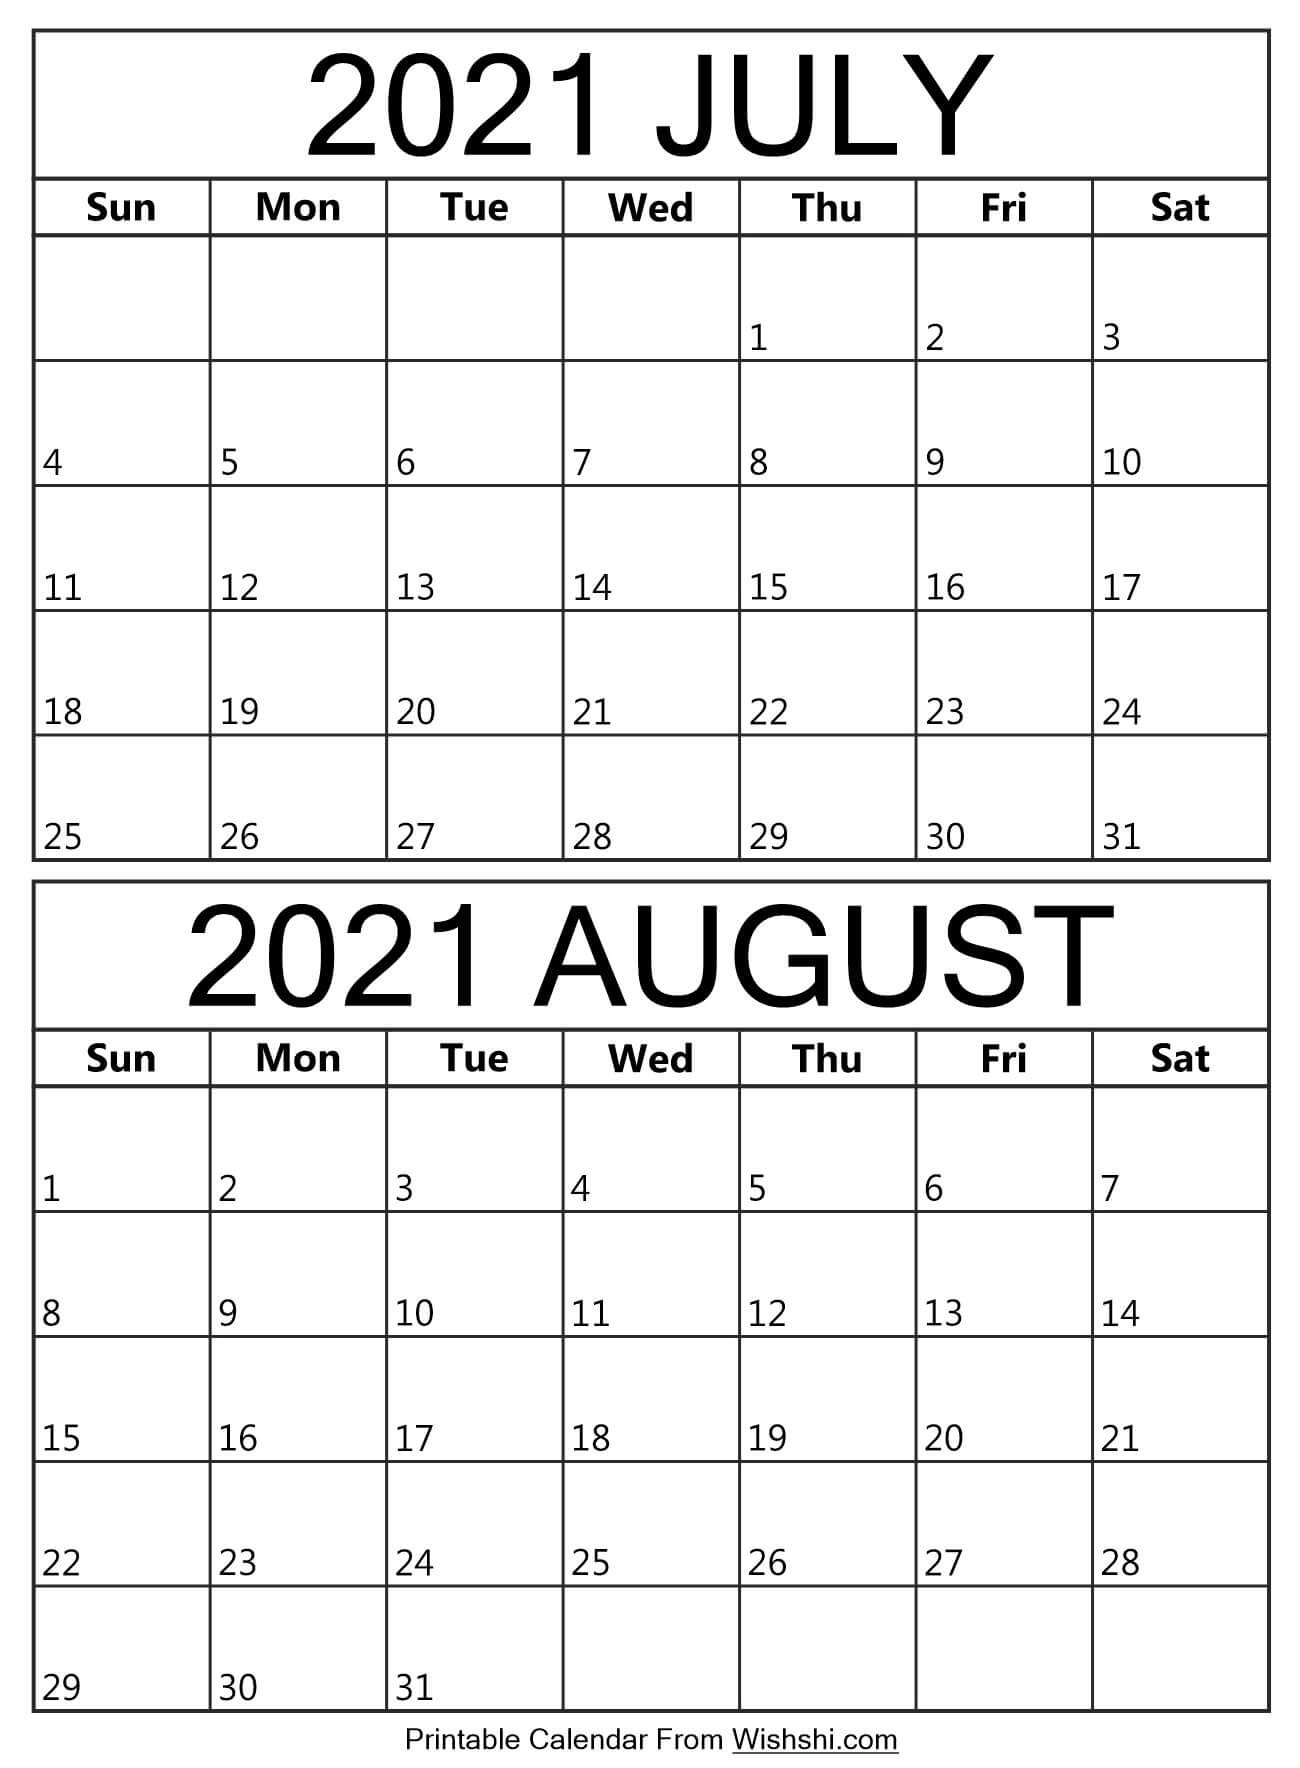 Free Printable Calendar August 2021 To July 2021 - 2021 Calendar Printable August 2021 Calendar With Moon Phases